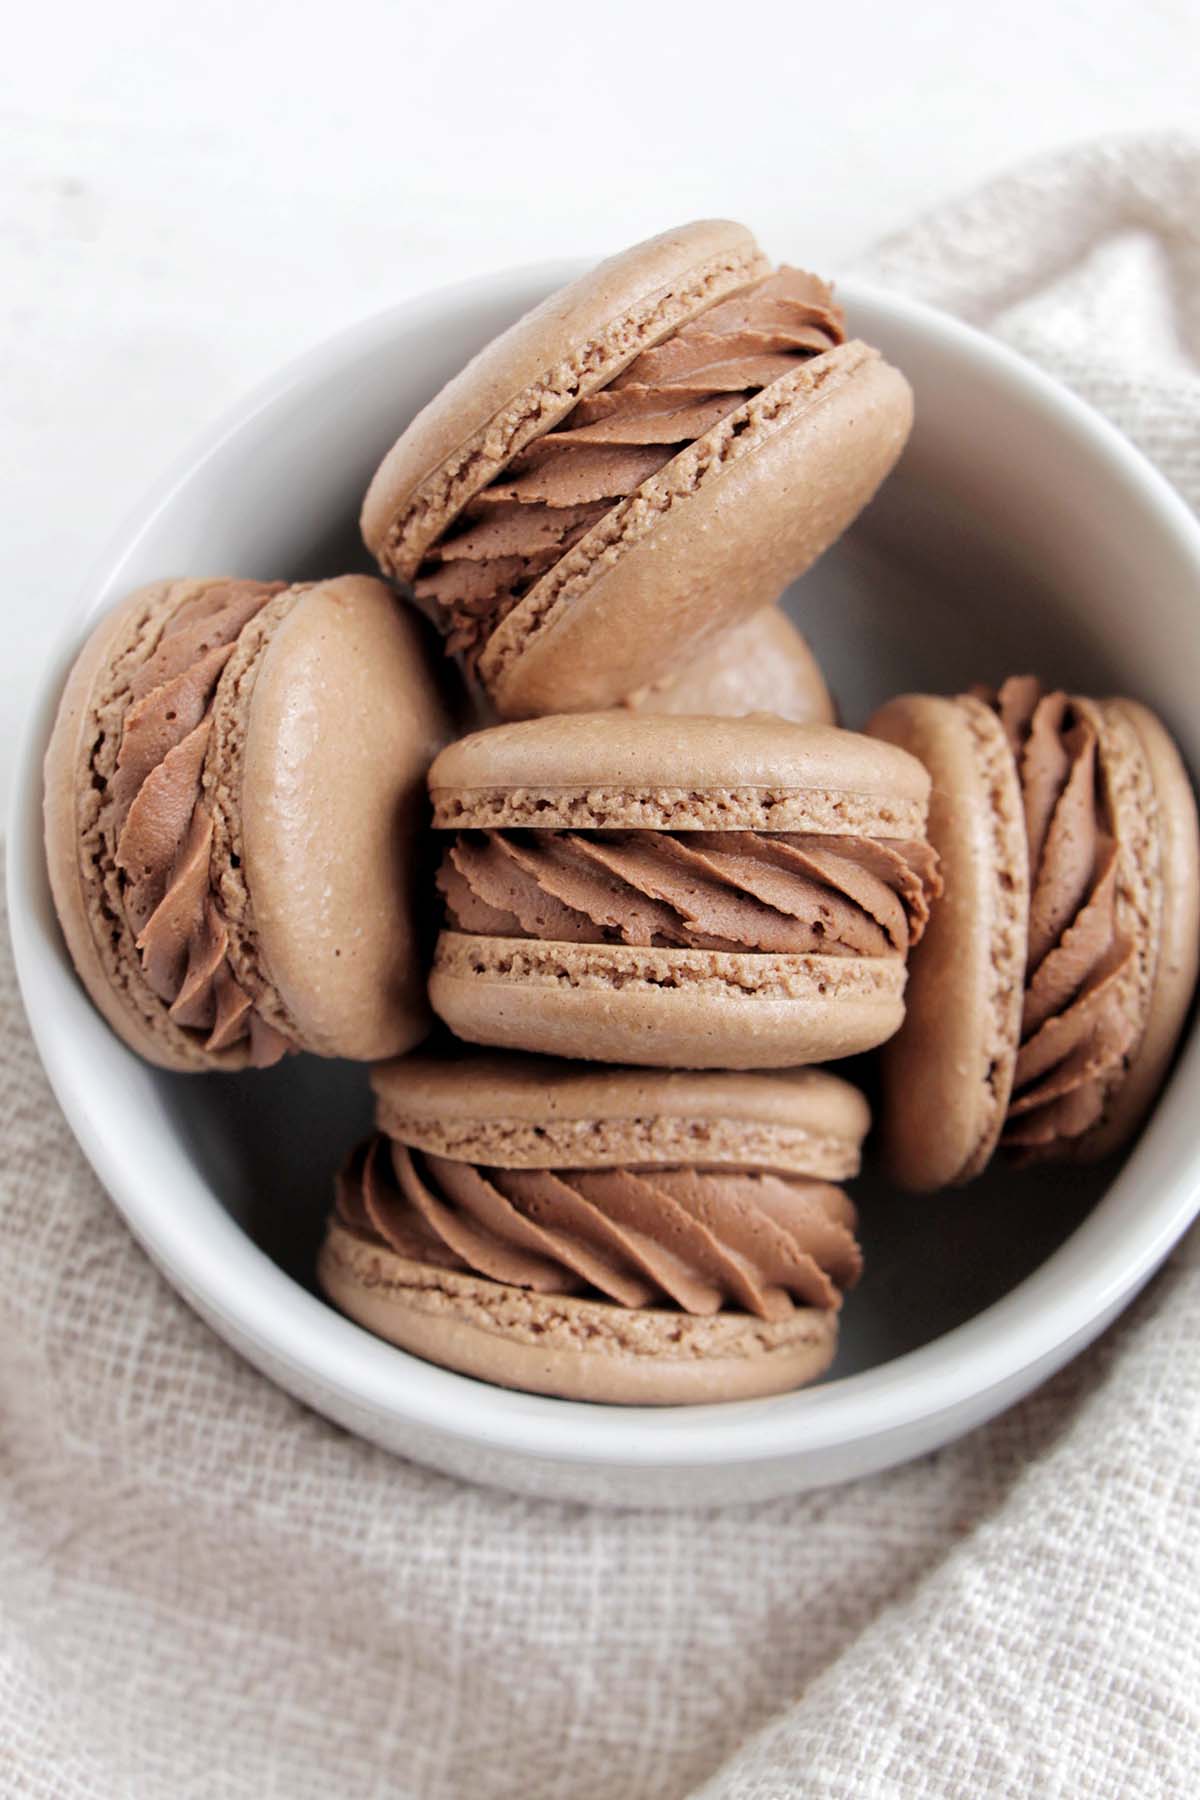 chocolate macarons filled with chocolate buttercream.